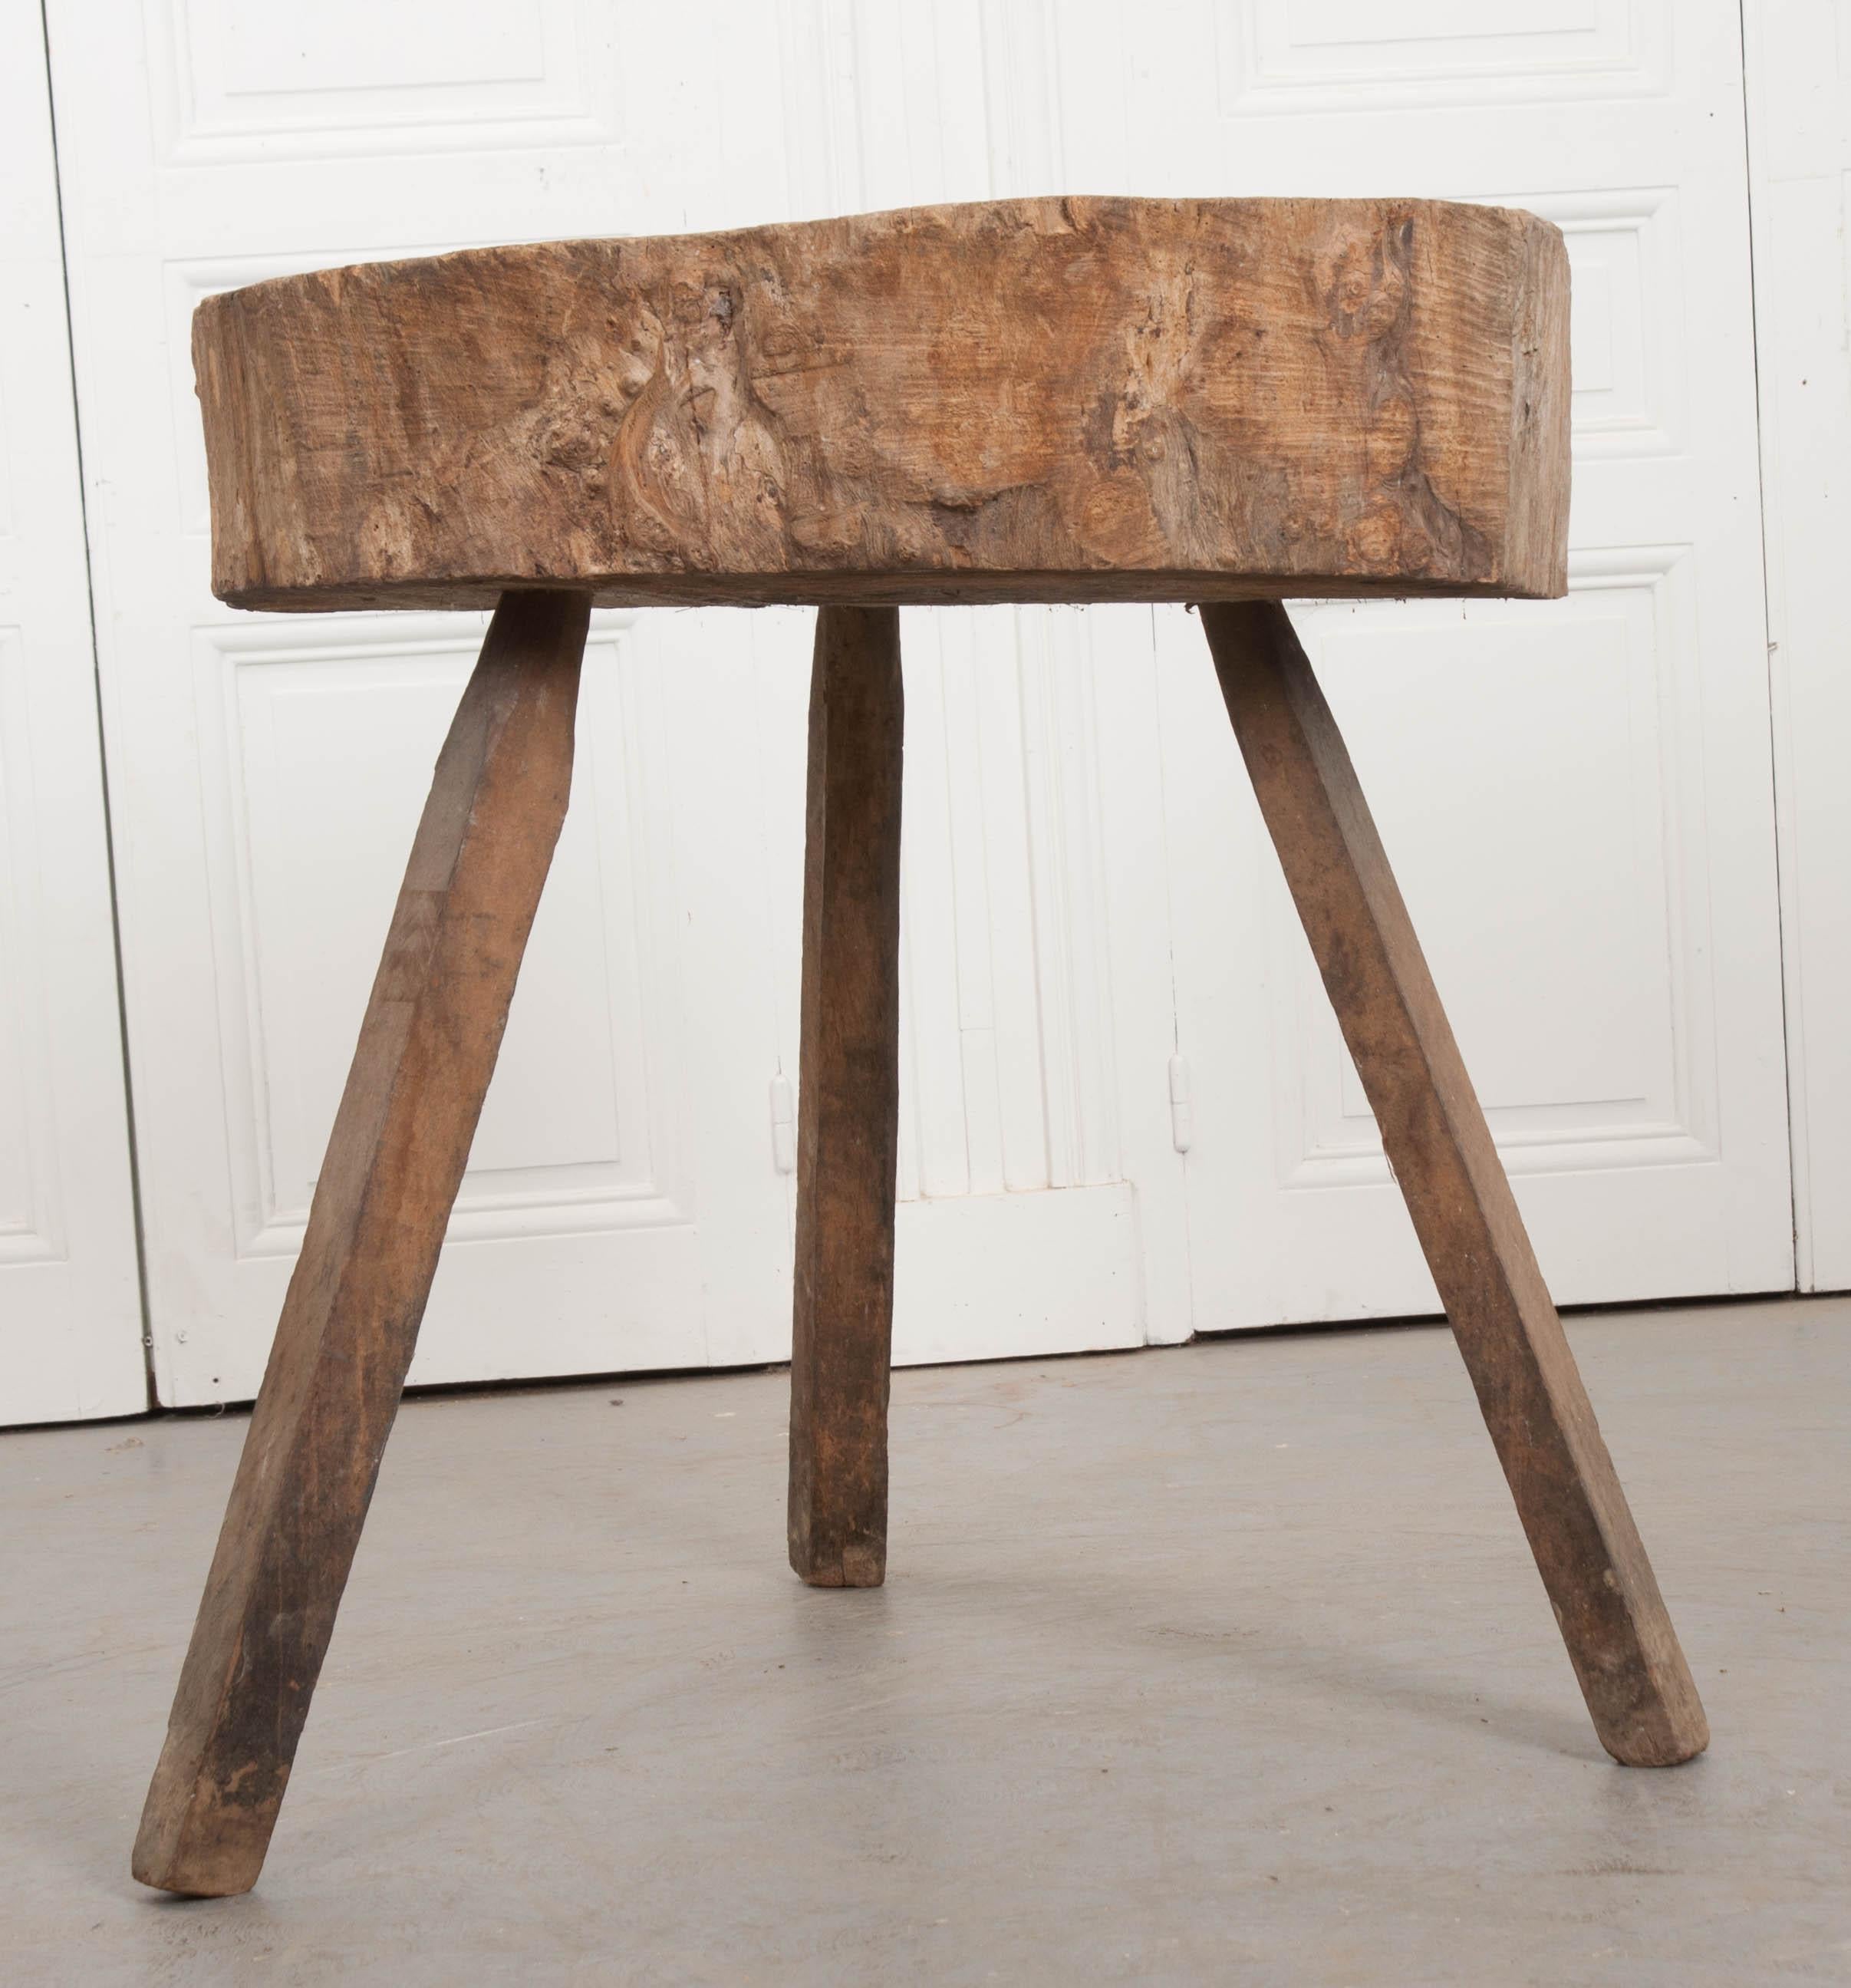 An impressive circular chopping block straight from the bucolic countryside of France! It is sectioned from an 8? slab of tree trunk and supported by three simply-planed splayed legs, circa 1880s.